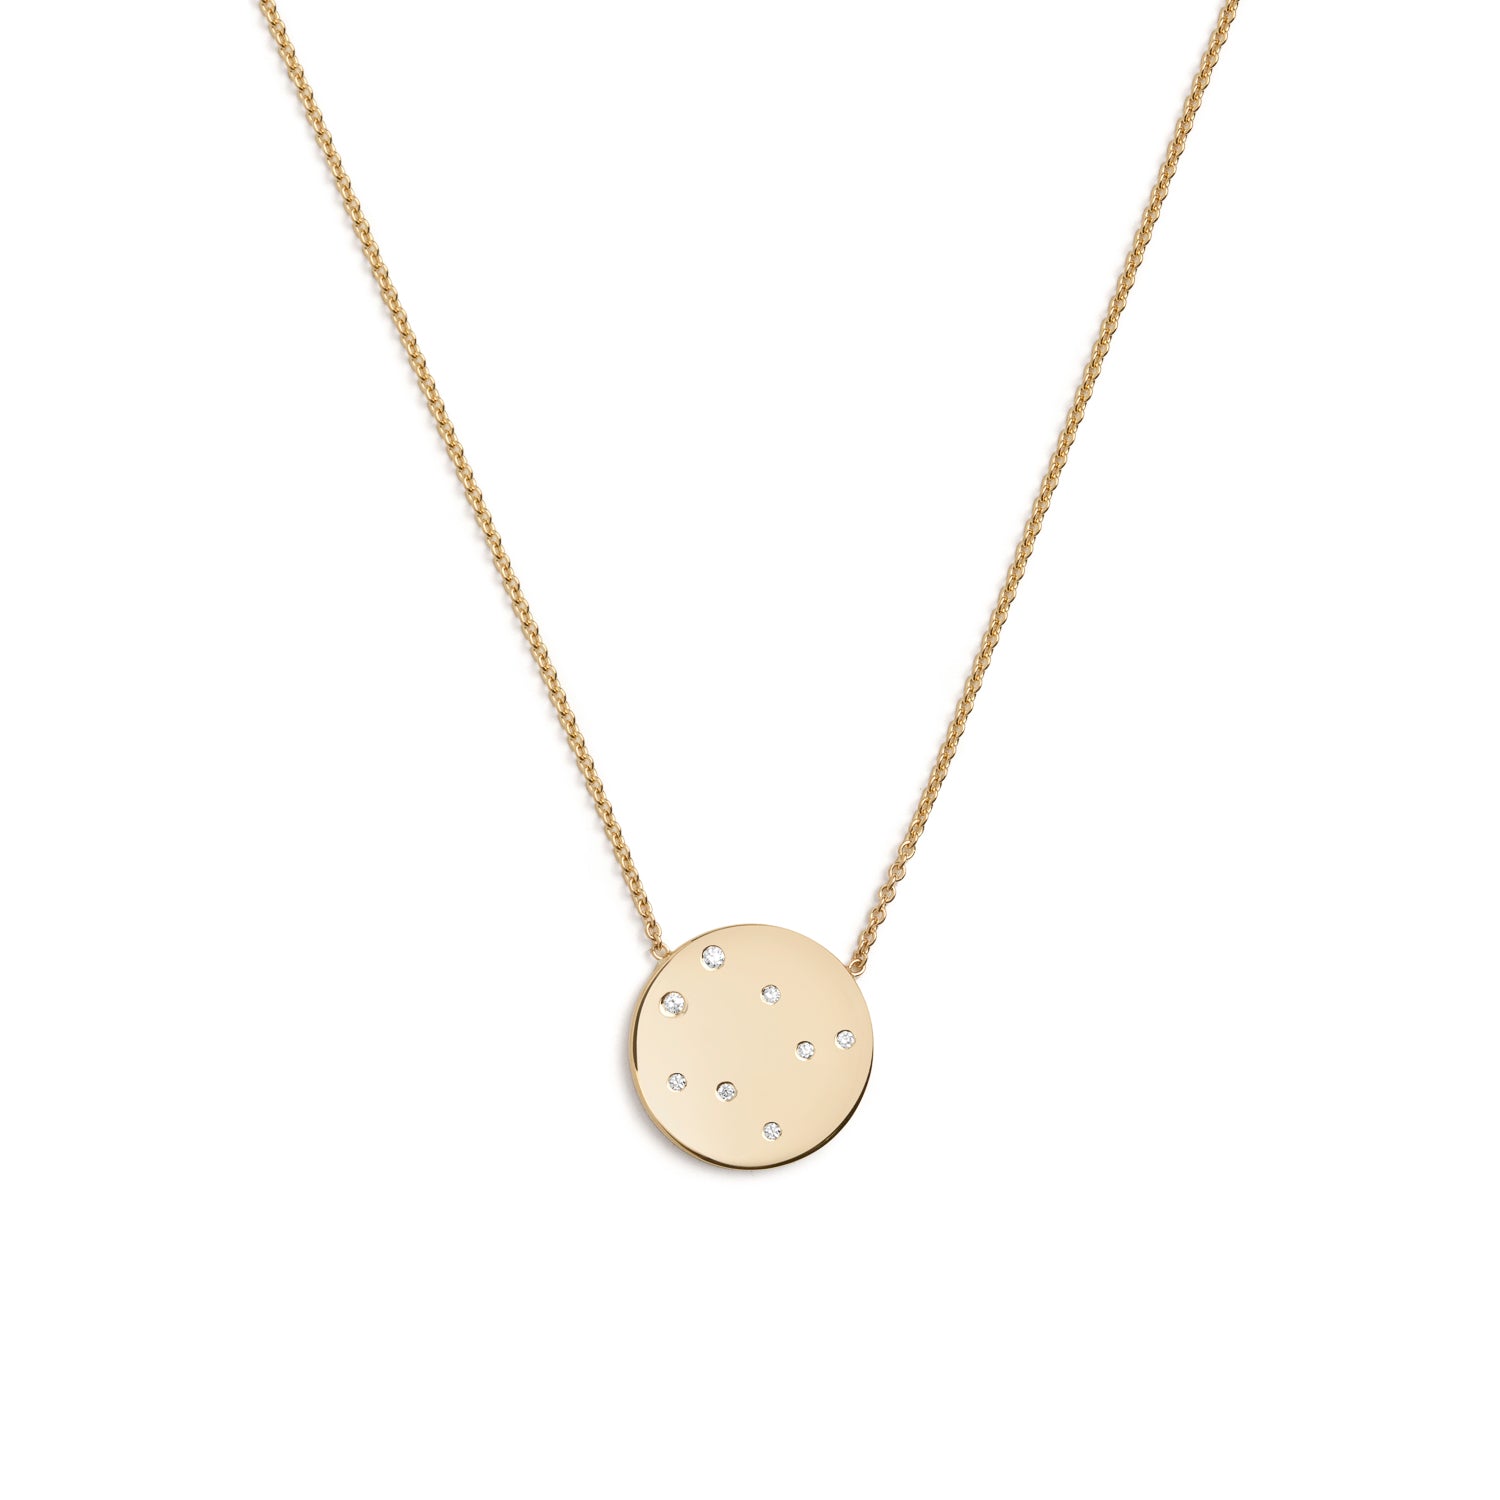 Gemini Star Sign Necklace in Gold